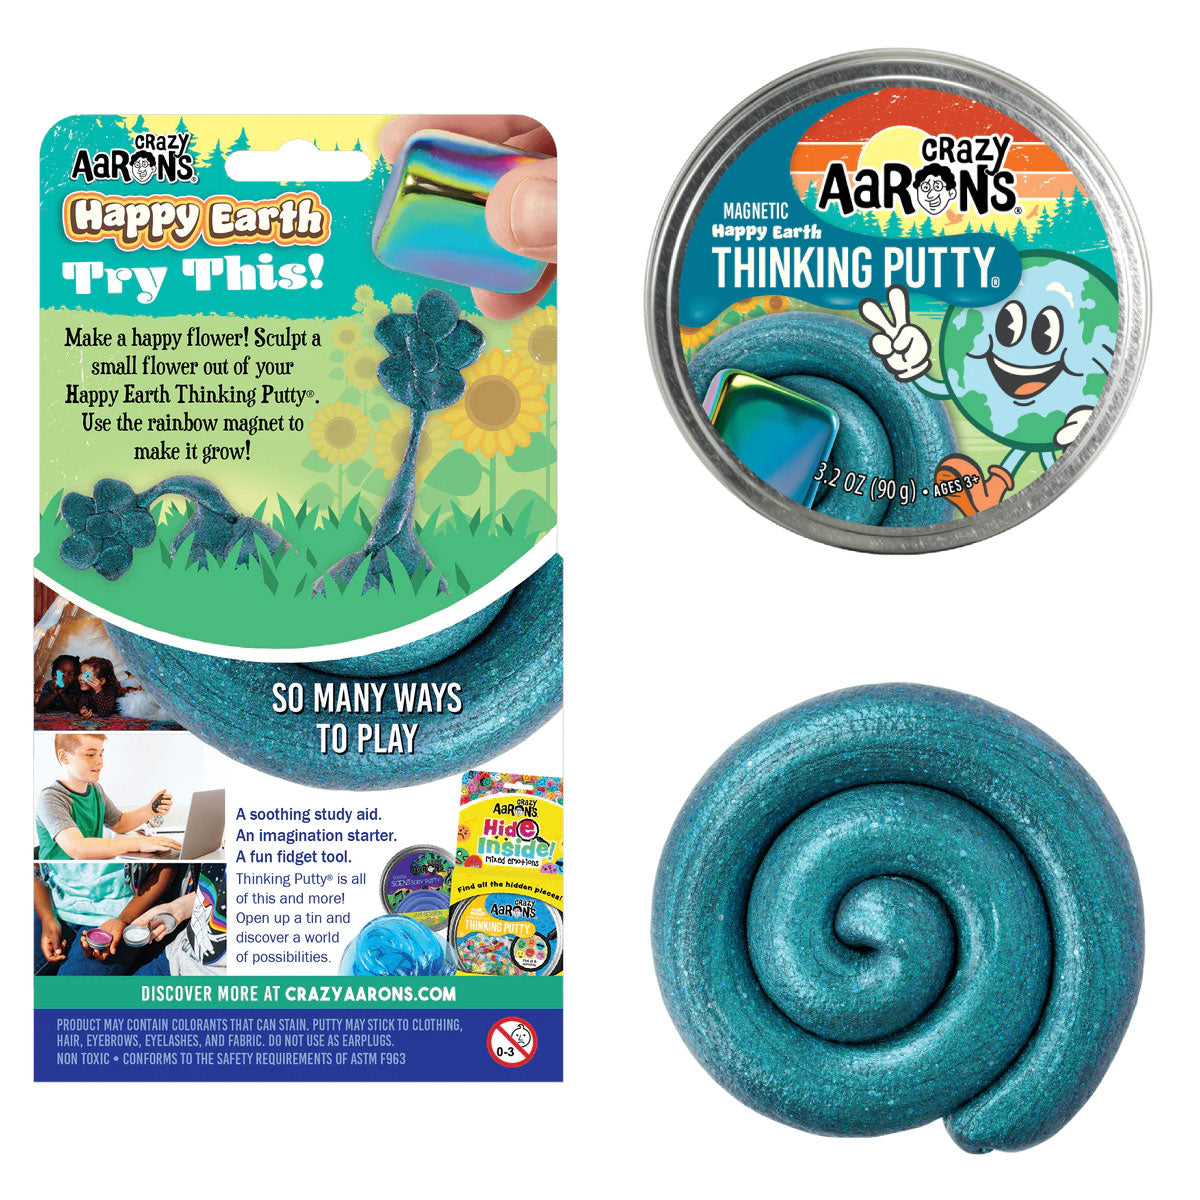 Crazy Aaron's Happy Earth Magnetic Storm Thinking Putty